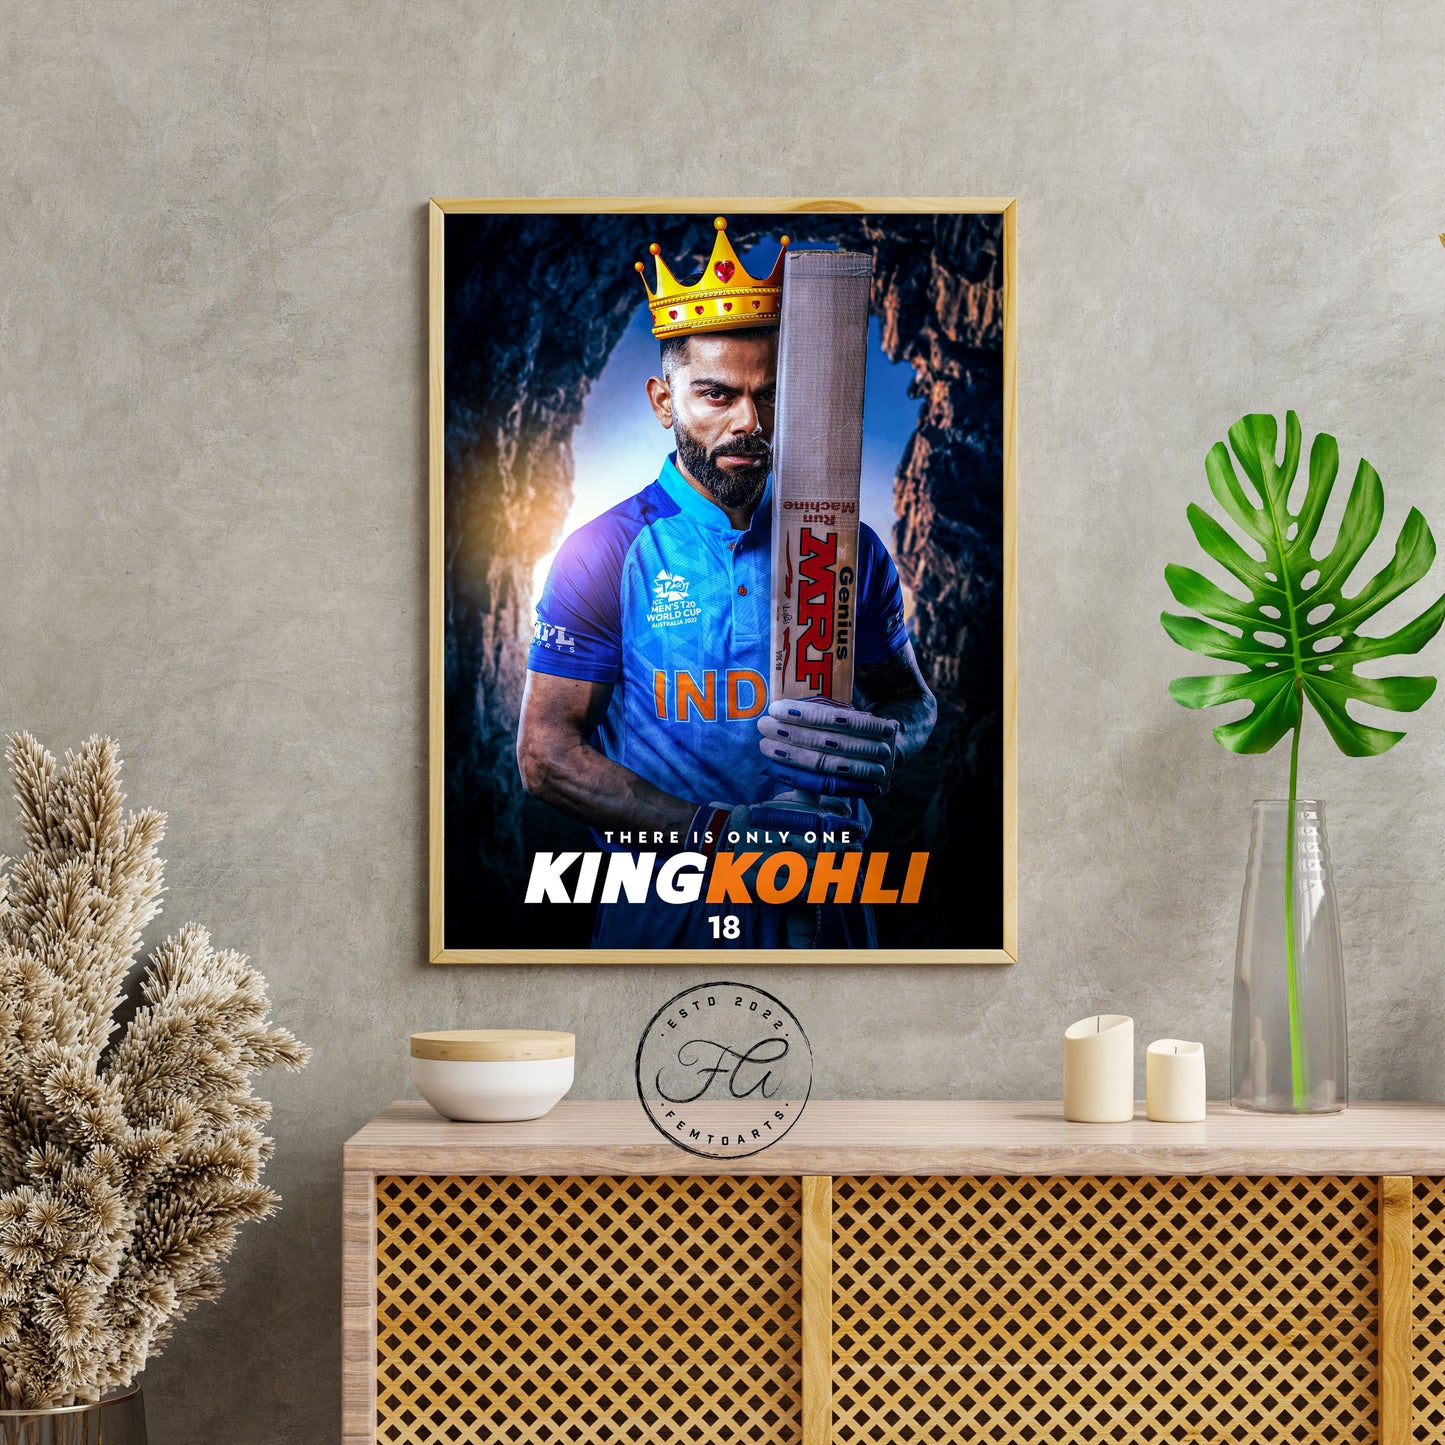 There is only one King Kohli